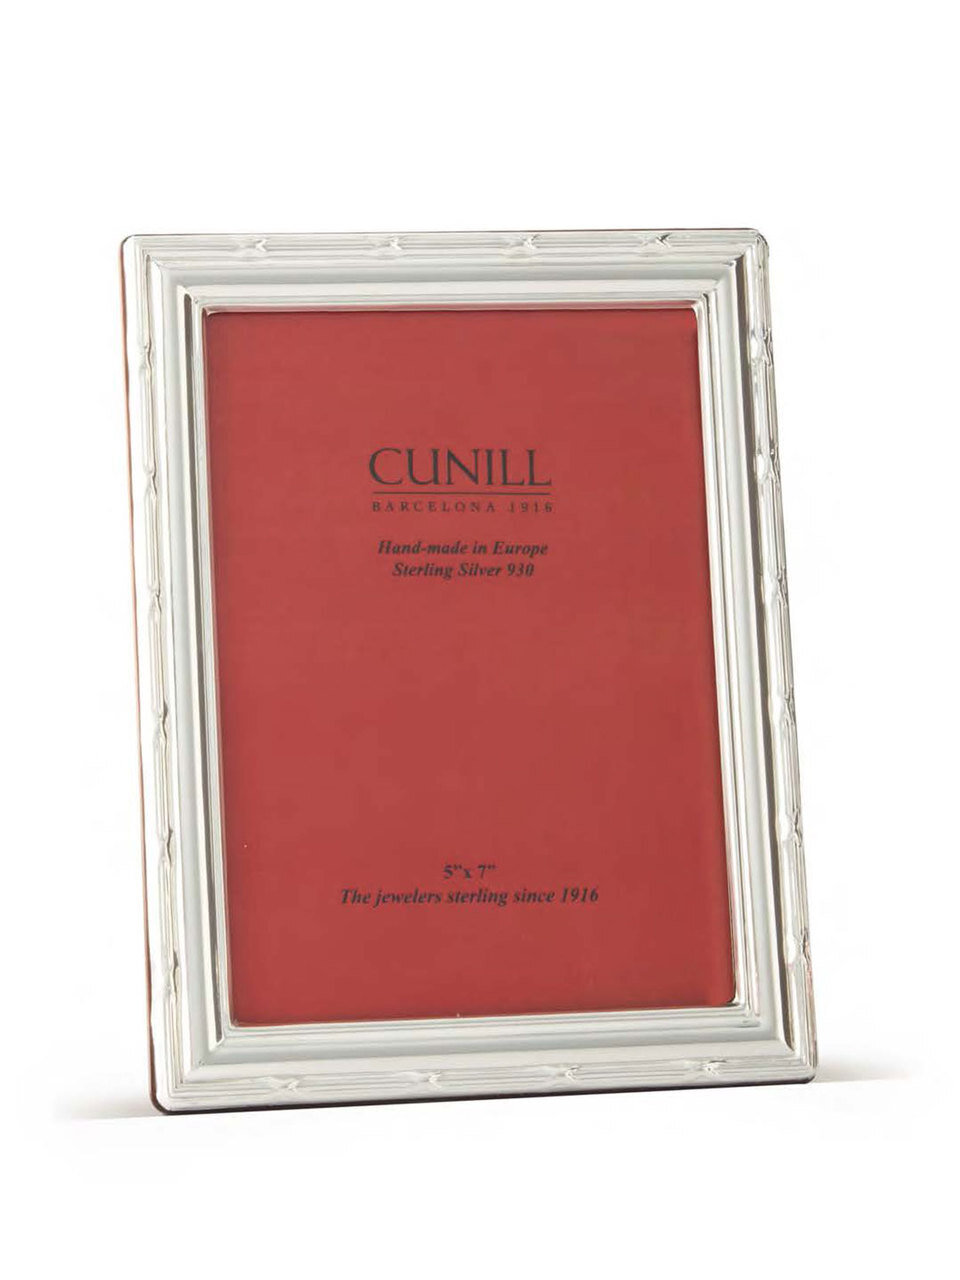 Cunill Ribbon 5 x 7 Inch Picture Frame - Sterling Silver